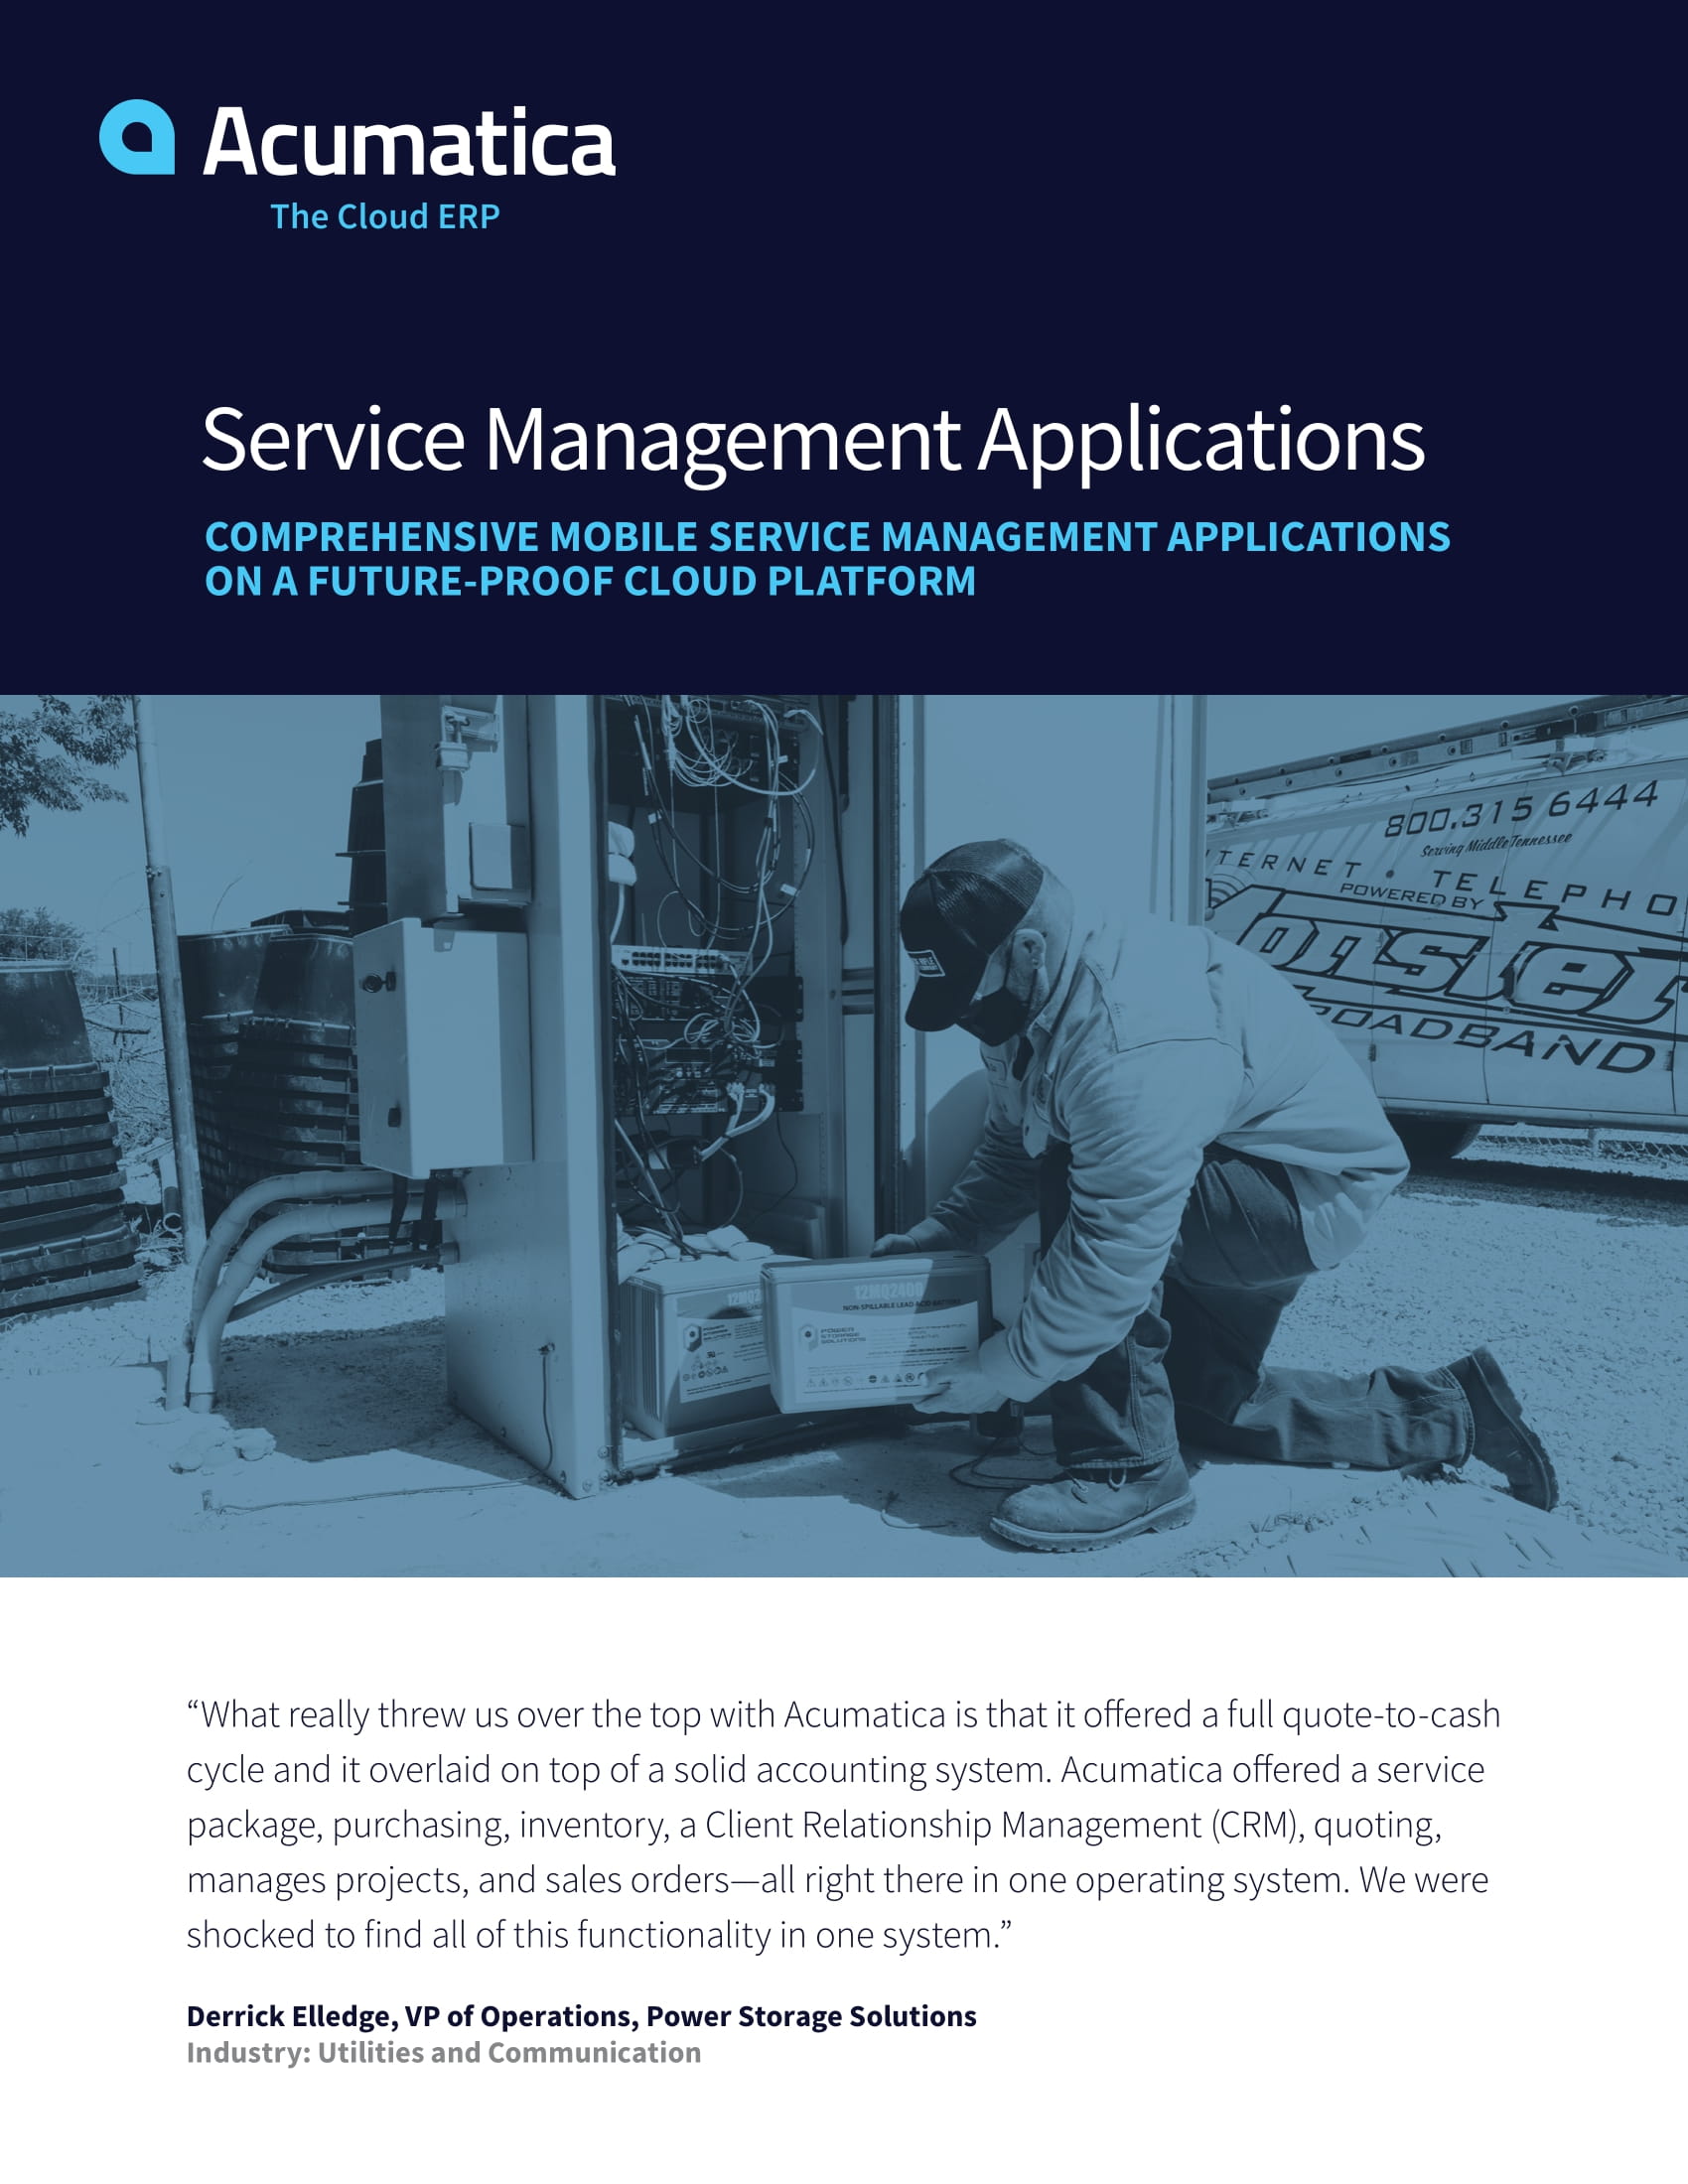 Drive Growth with Cloud Service Management Applications